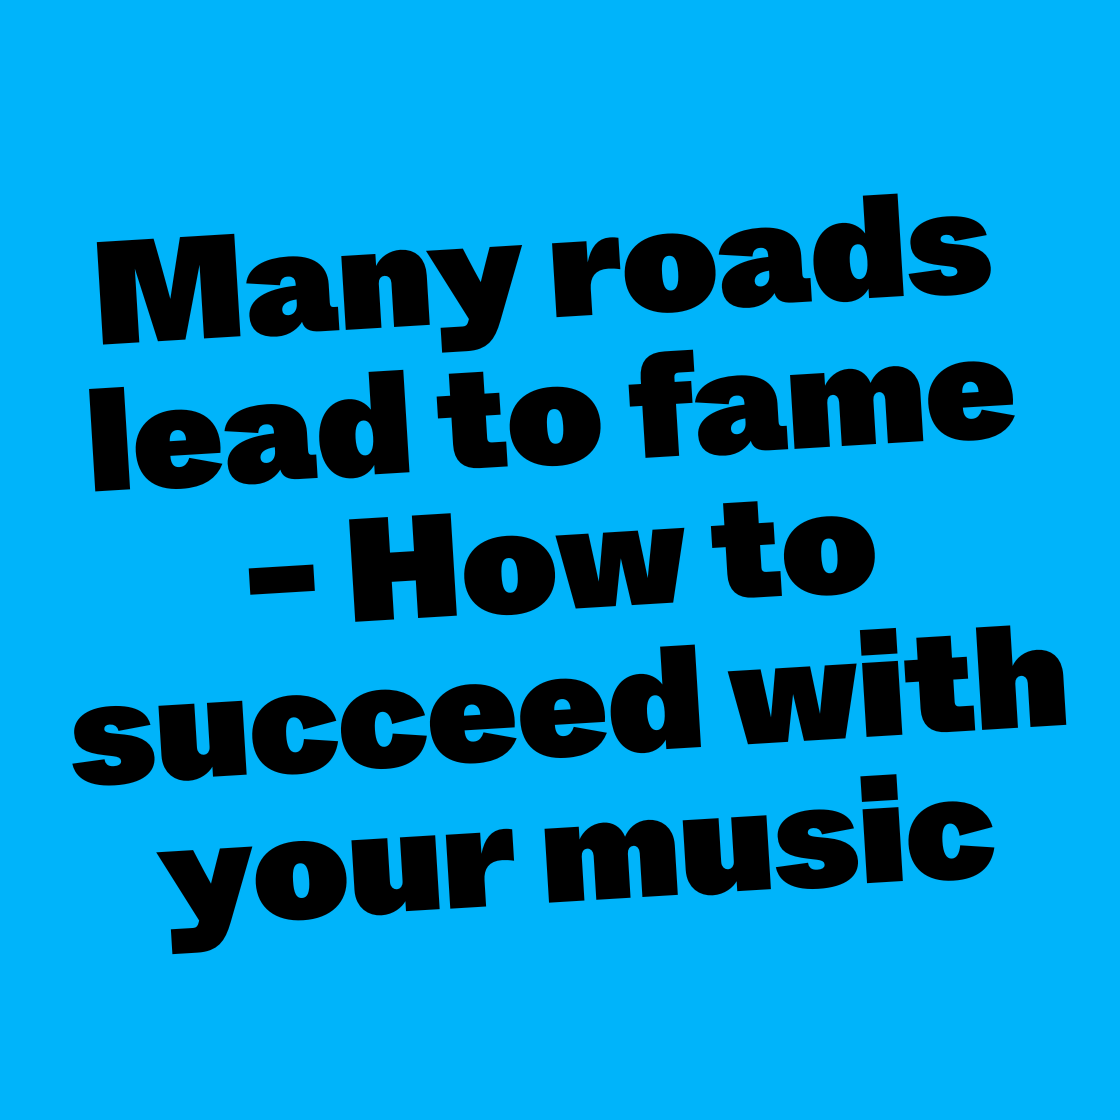 Many roads lead to fame - How to succeed with your music